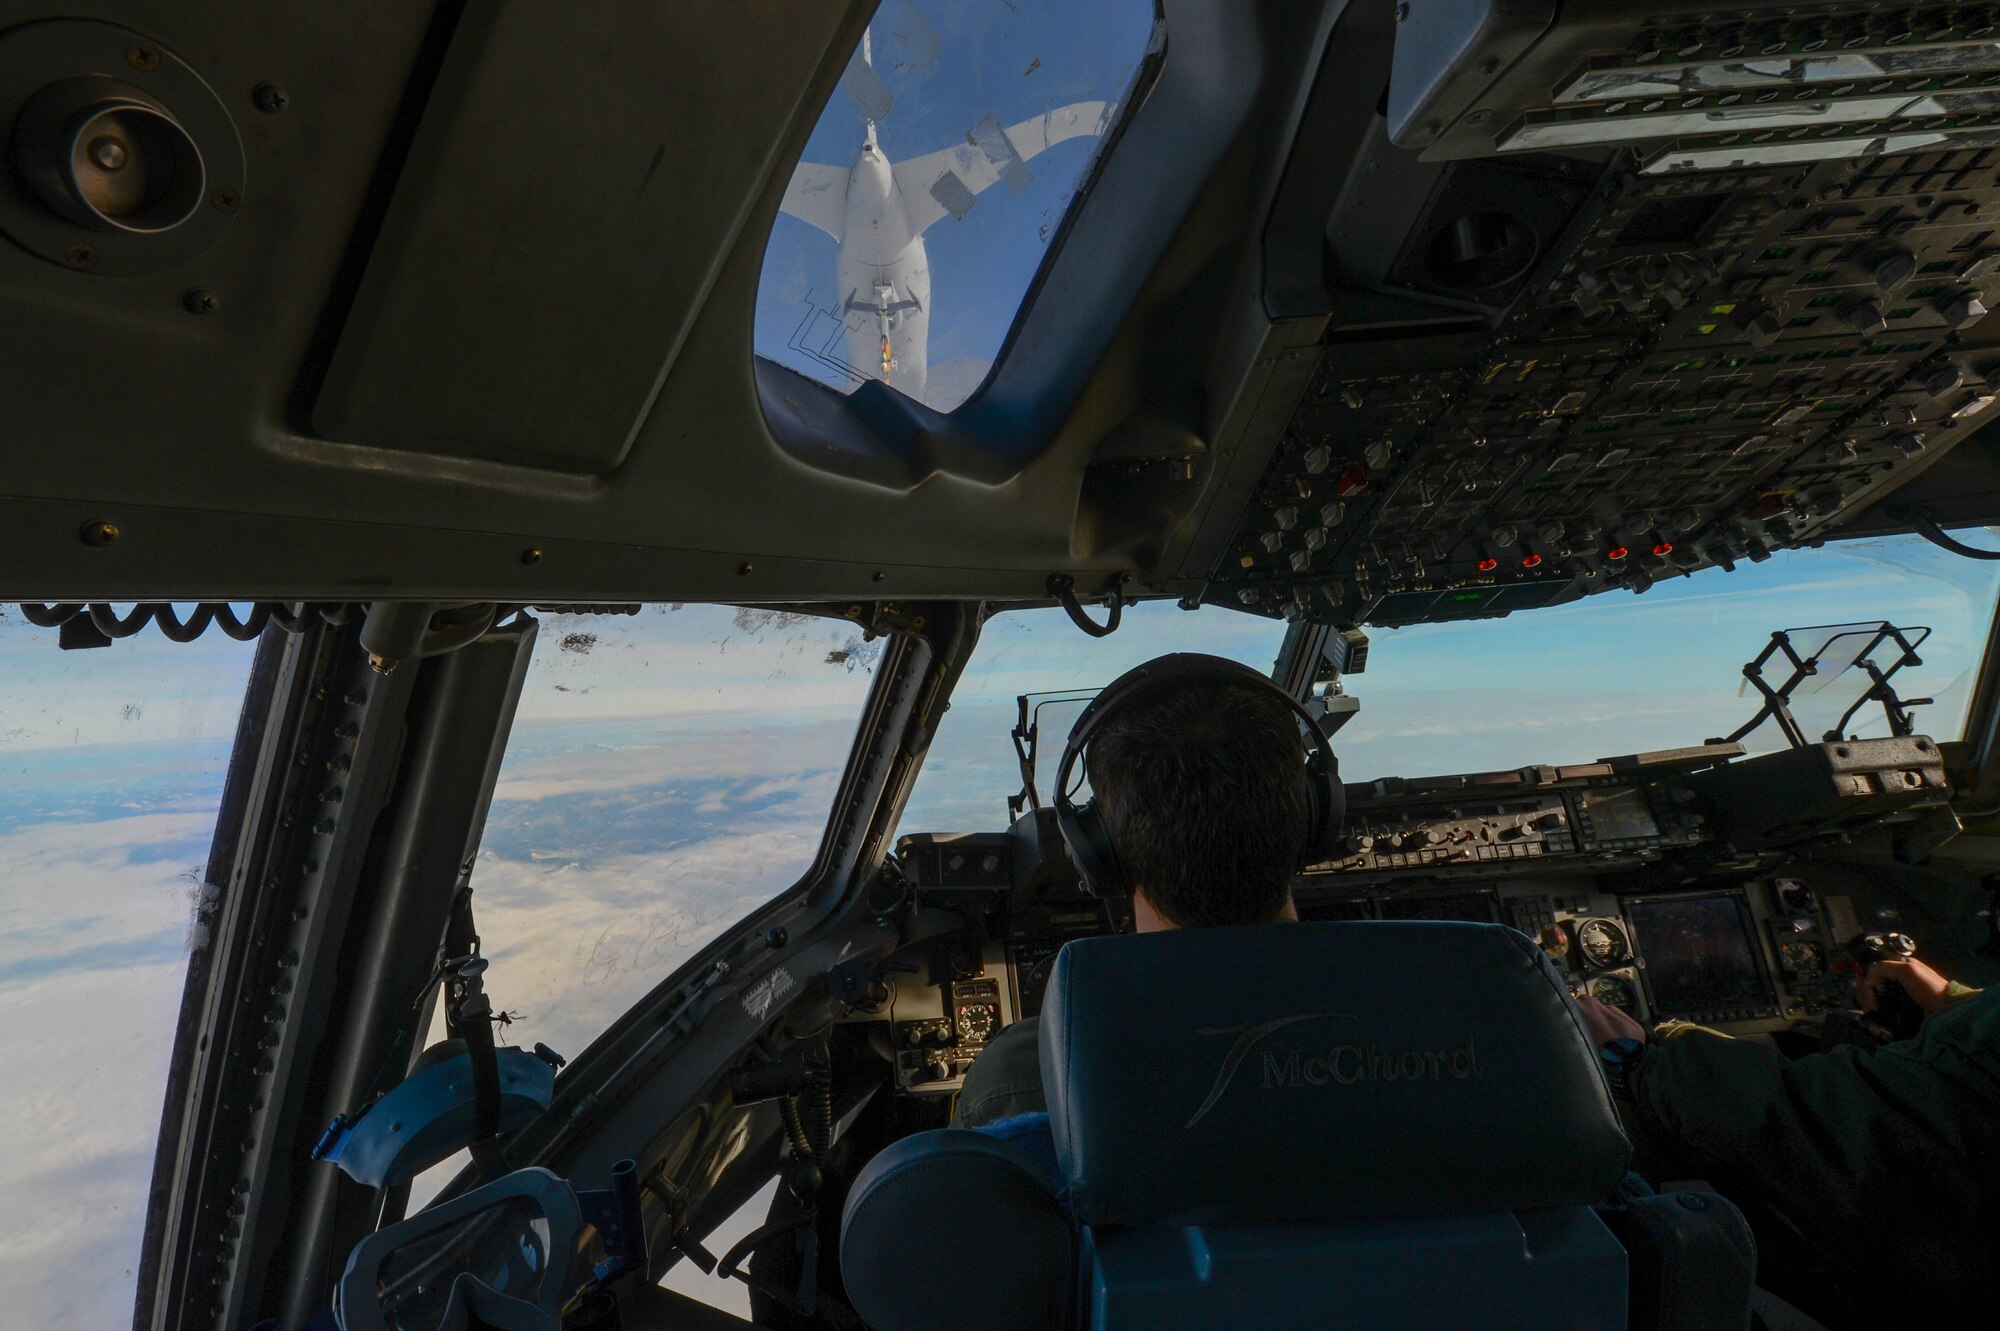 Capt. Wade Gallup, 7th Airlift Squadron pilot, approaches a KC-46 Pegasus during refueling training over central Wash., Jan. 30, 2019. With its multiple options the KC-46 can refuel Air Force, Navy, Marine Corps and partner nation aircraft. (U.S. Air Force photo by A1C Sara Hoerichs)